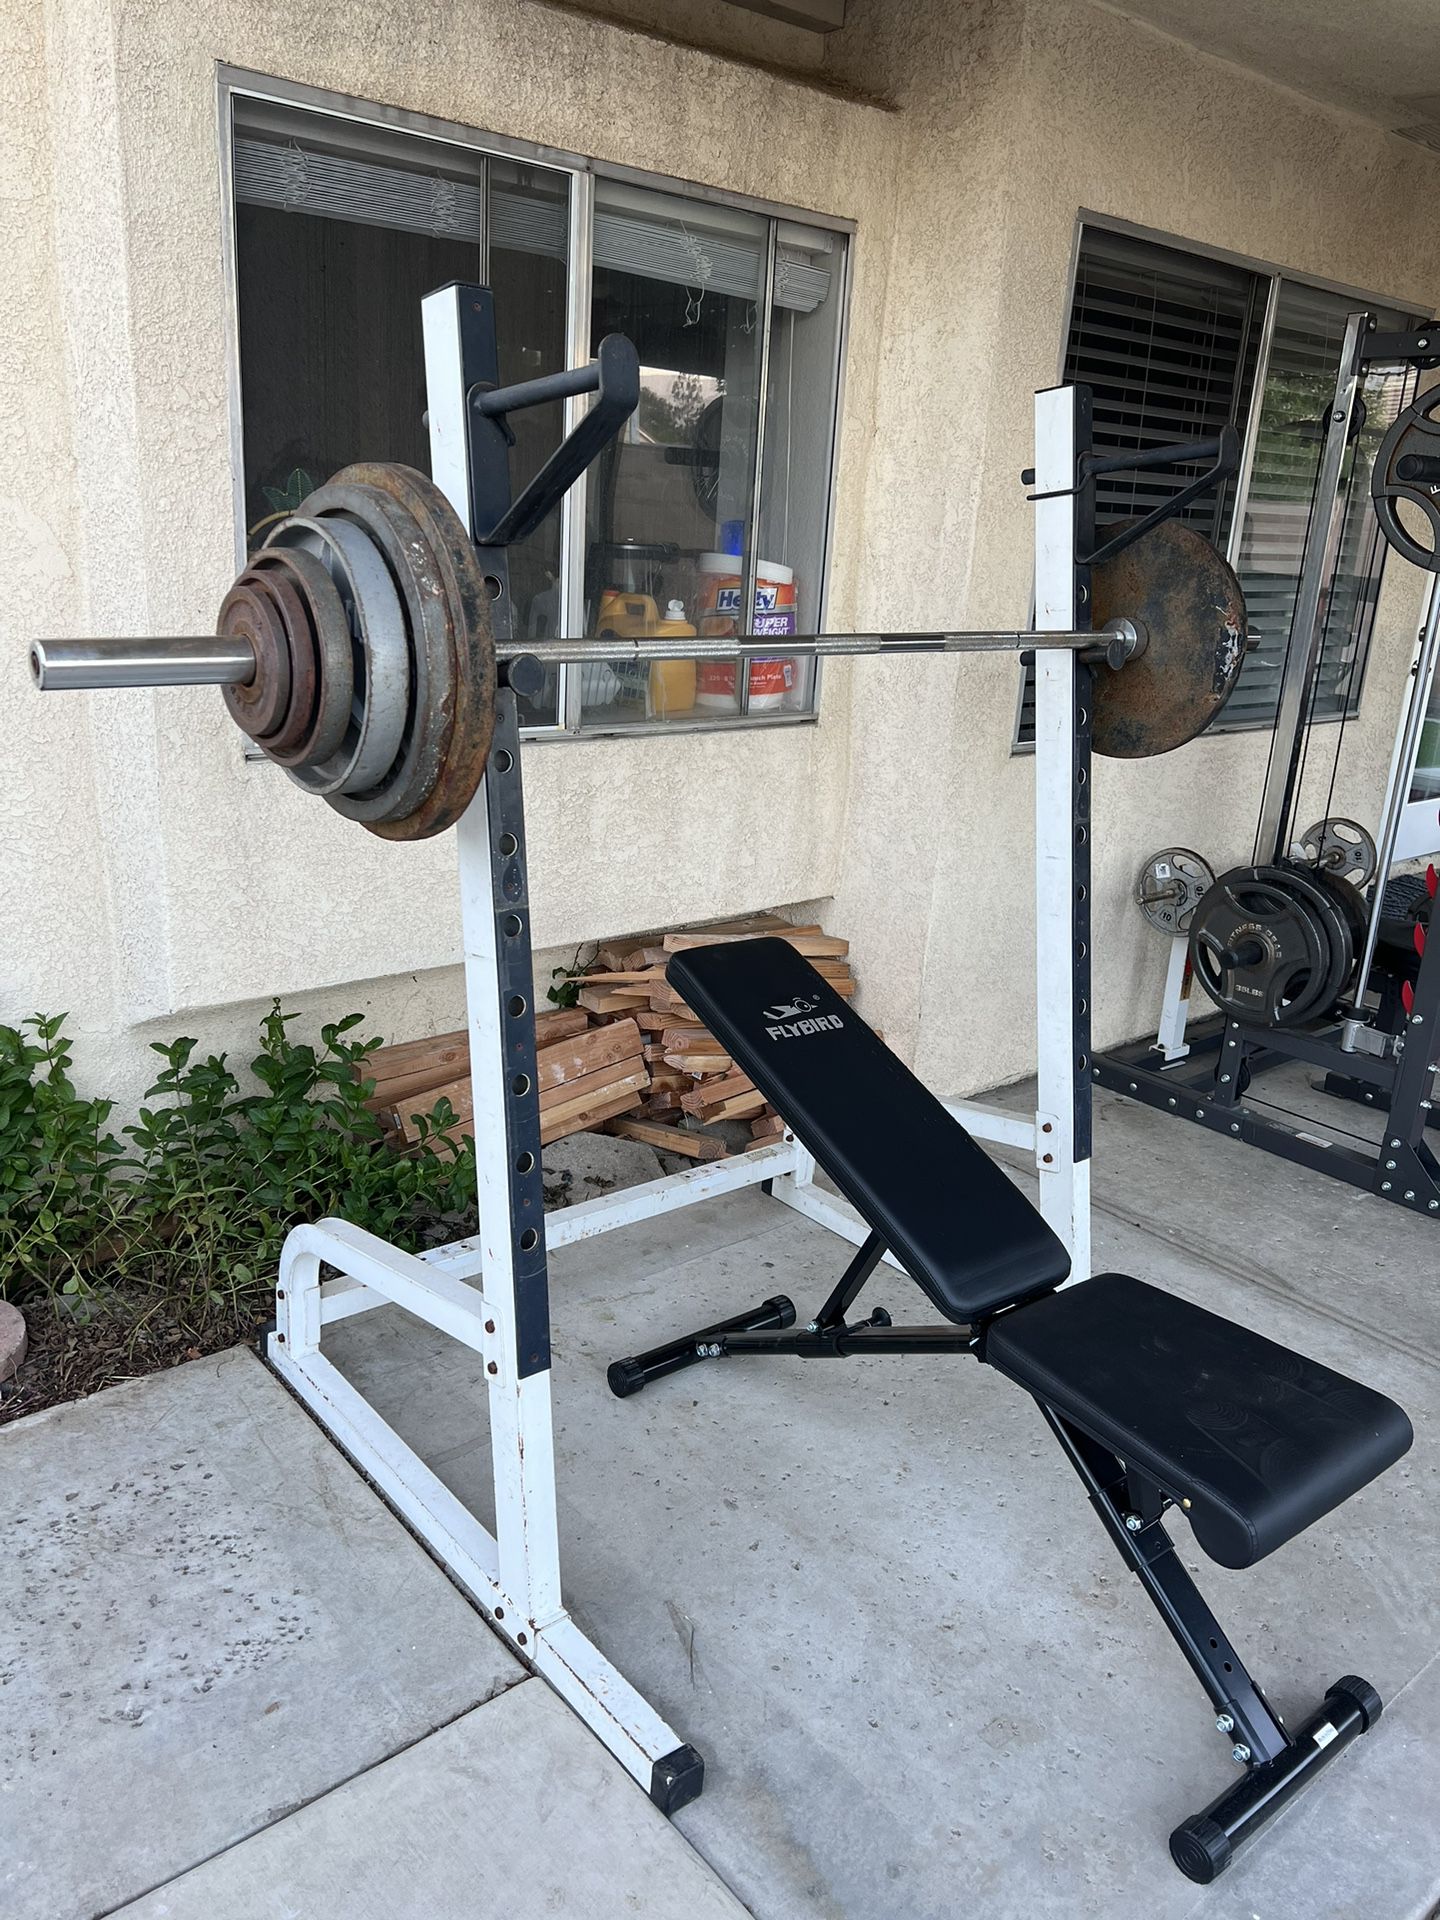 Squat Rack Weight Bench With Bar, Weights, And Bench